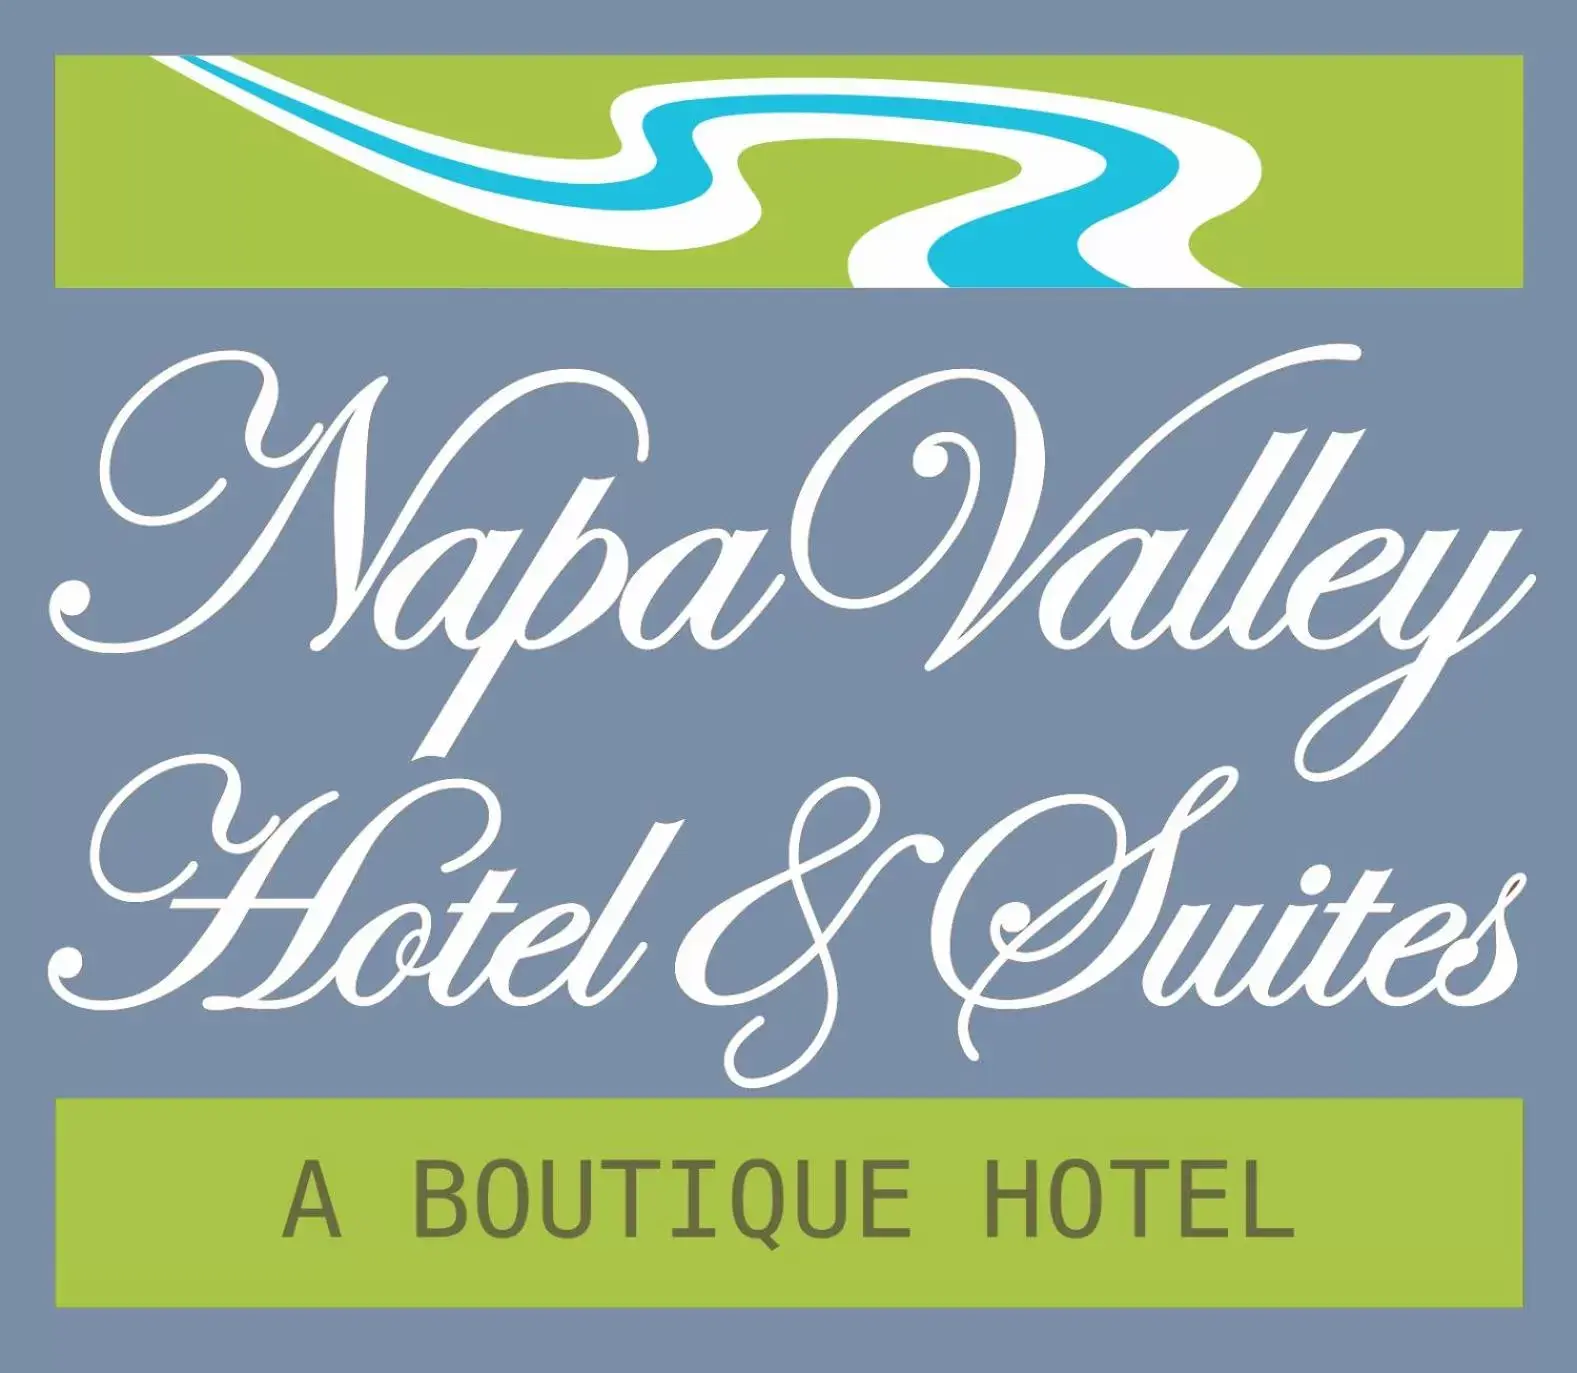 Property logo or sign, Property Logo/Sign in Napa Valley Hotel & Suites